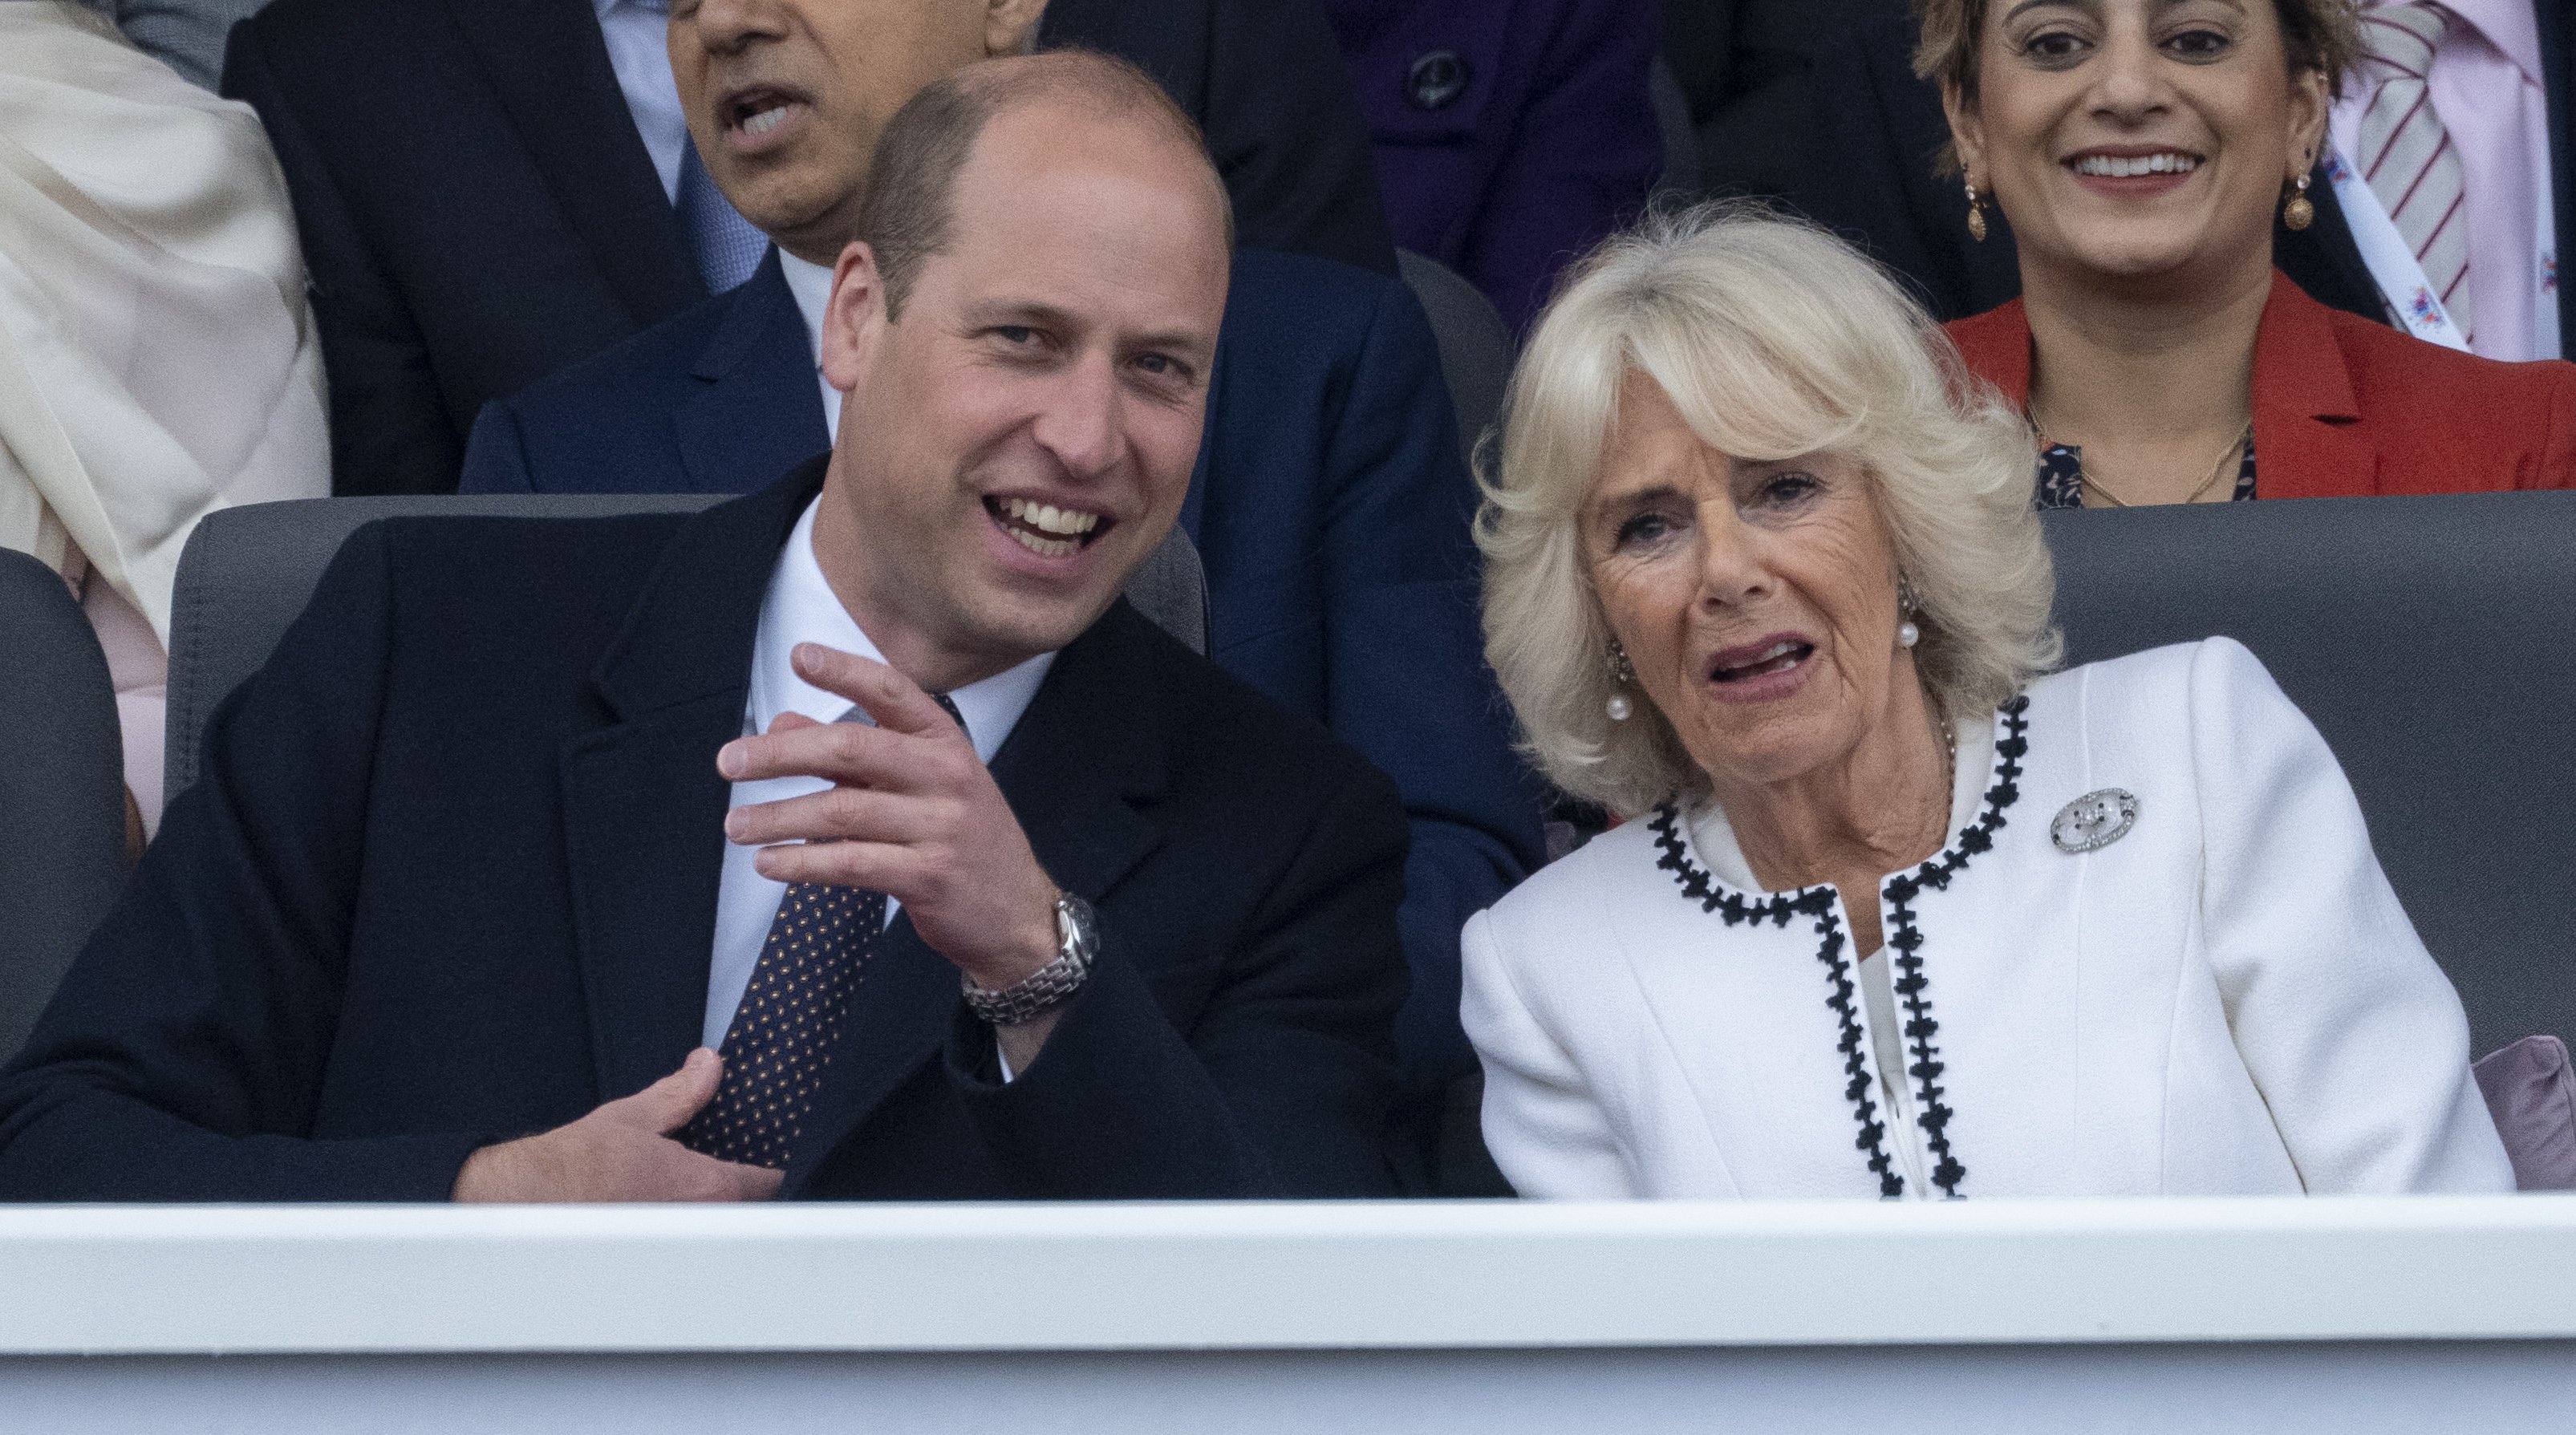 Camilla, Queen Consort and Prince William attend the Platinum Pageant on The Mall on June 5, 2022 in London, England ┃Source: Getty Images